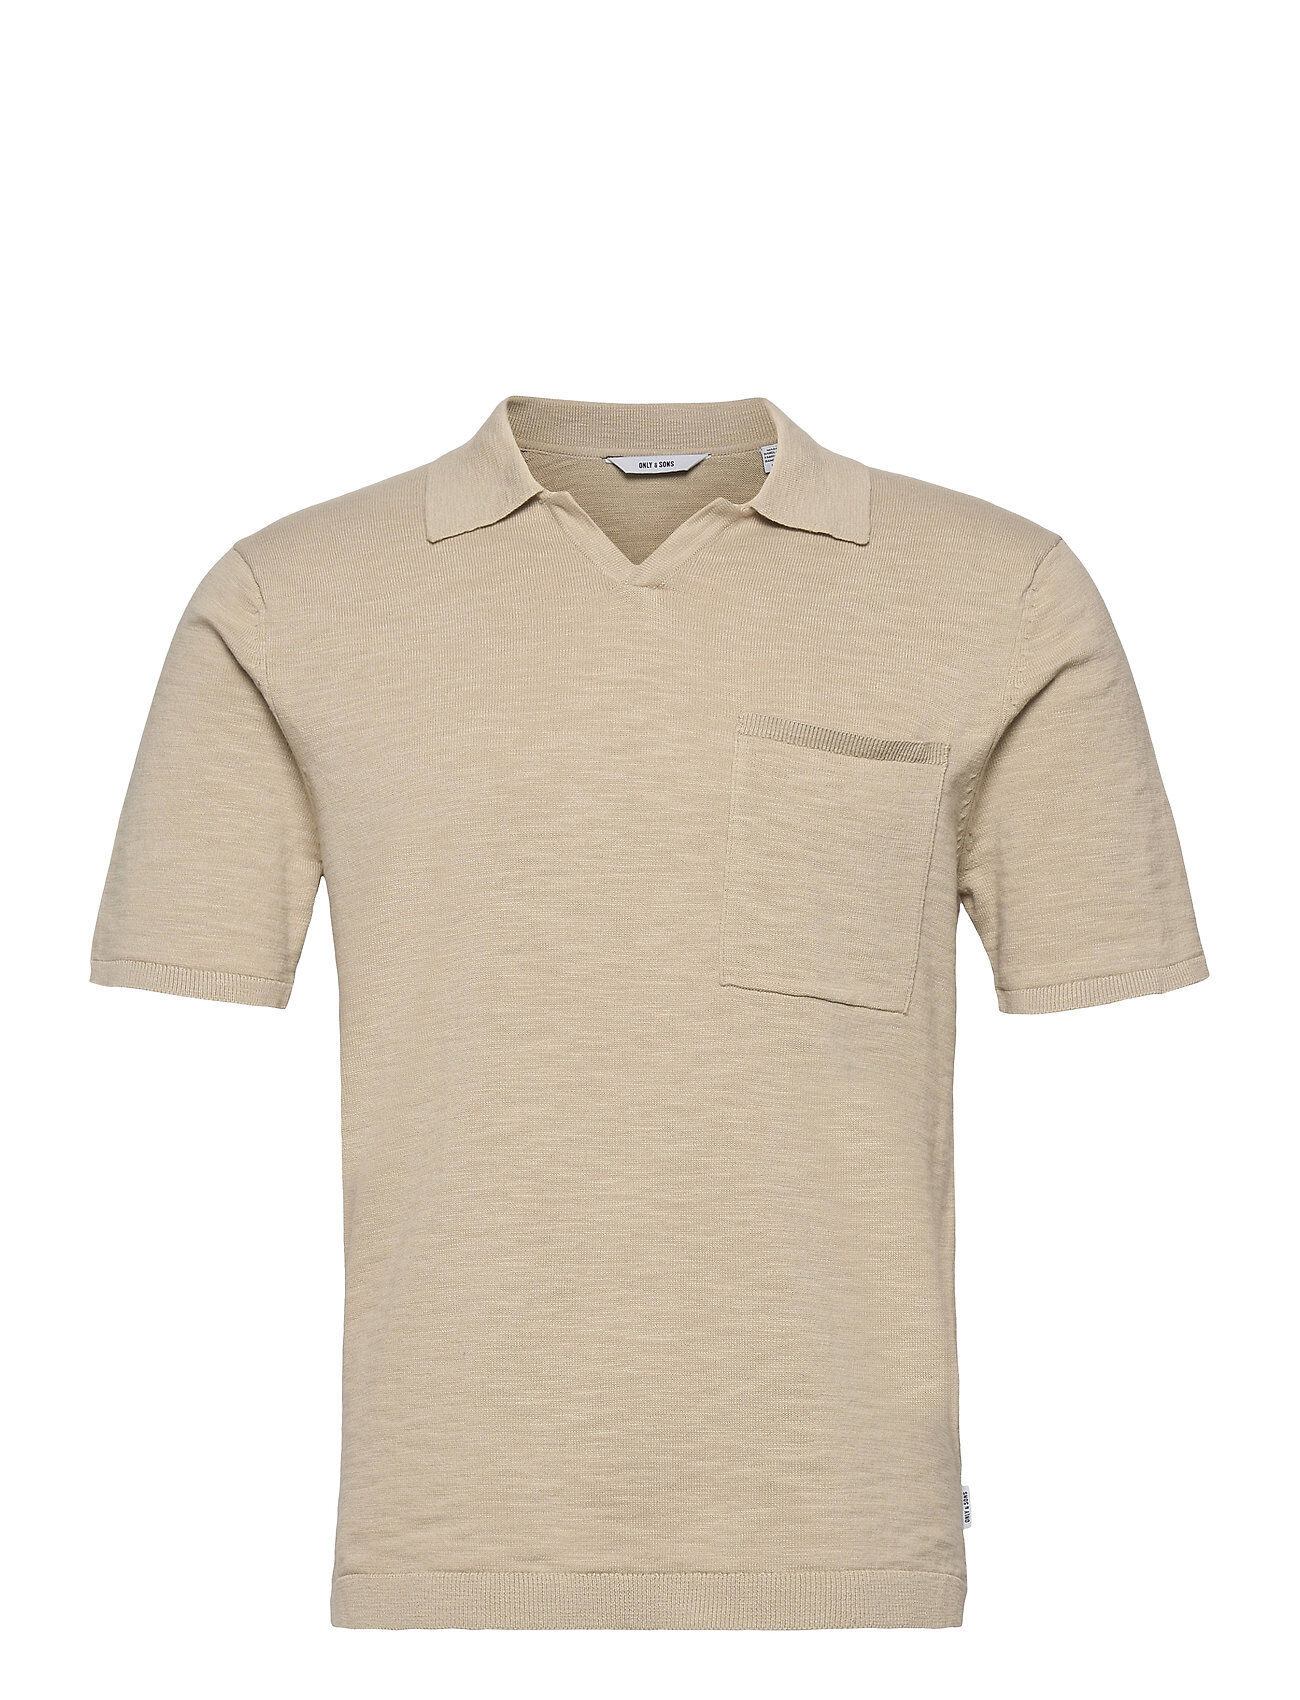 ONLY & SONS Onsace Life 12 Slub Ss Polo Knit Polos Short-sleeved Beige ONLY & SONS